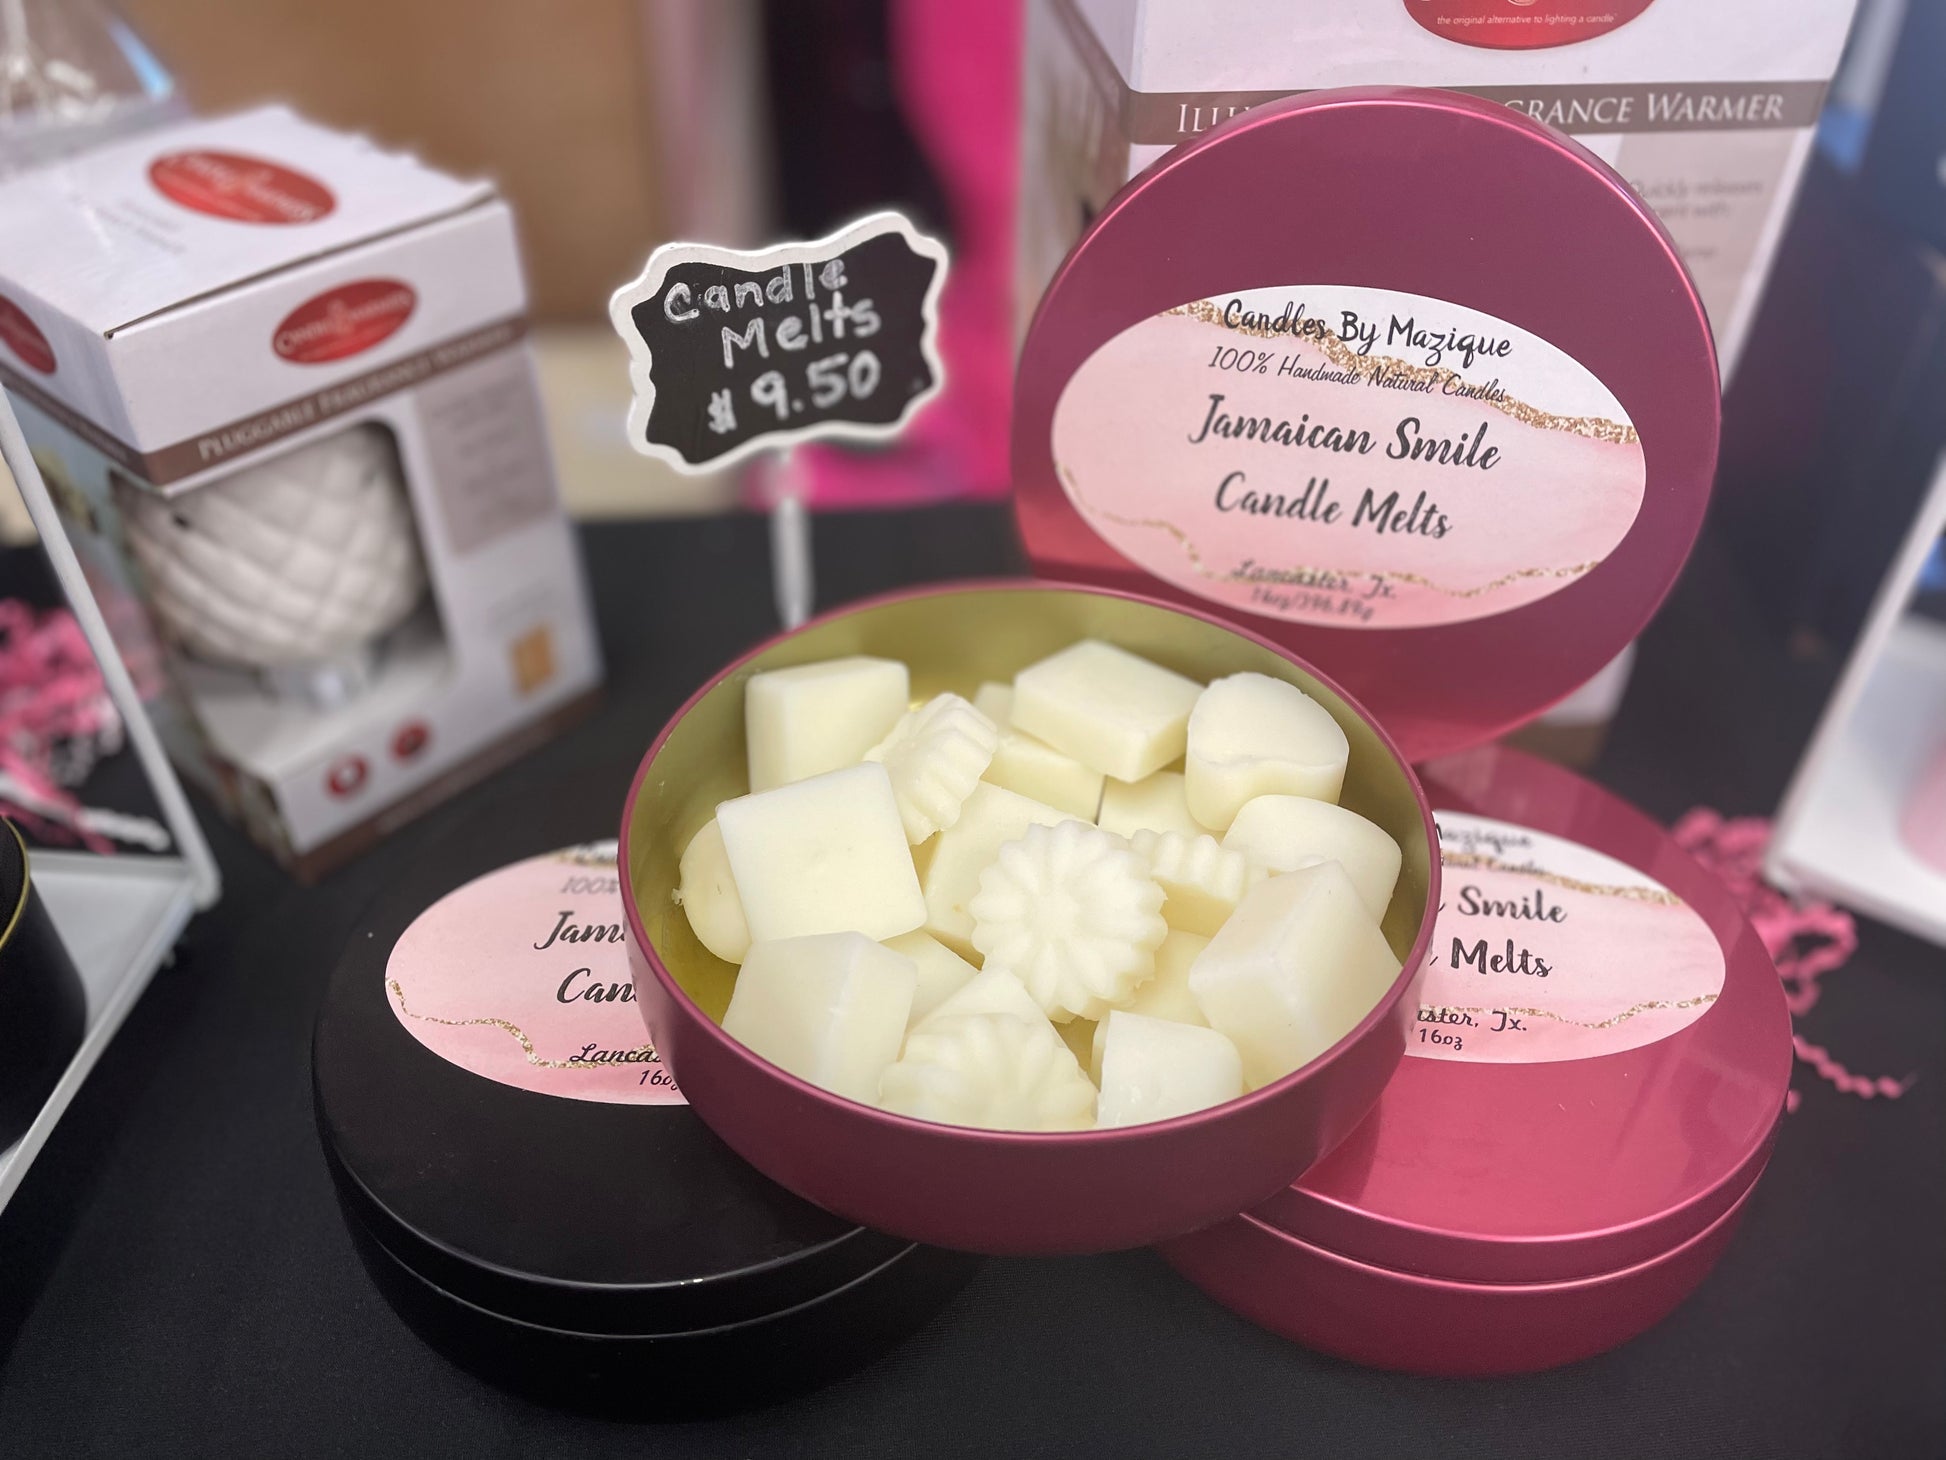 Jamaican Smile Candle Melts – Candles by Mazique